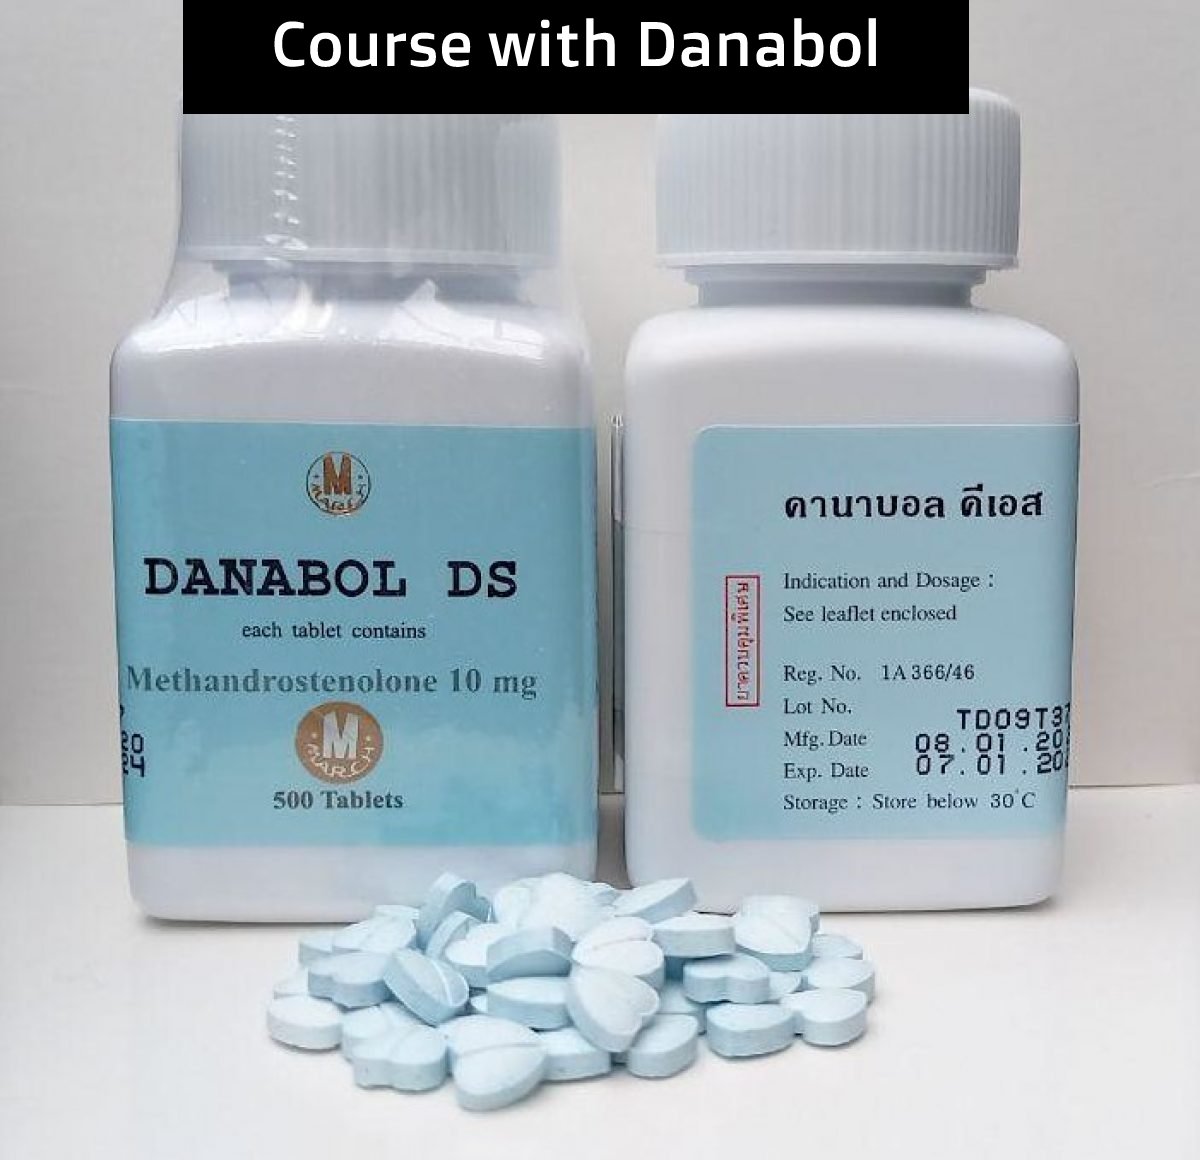 Course with Danabol